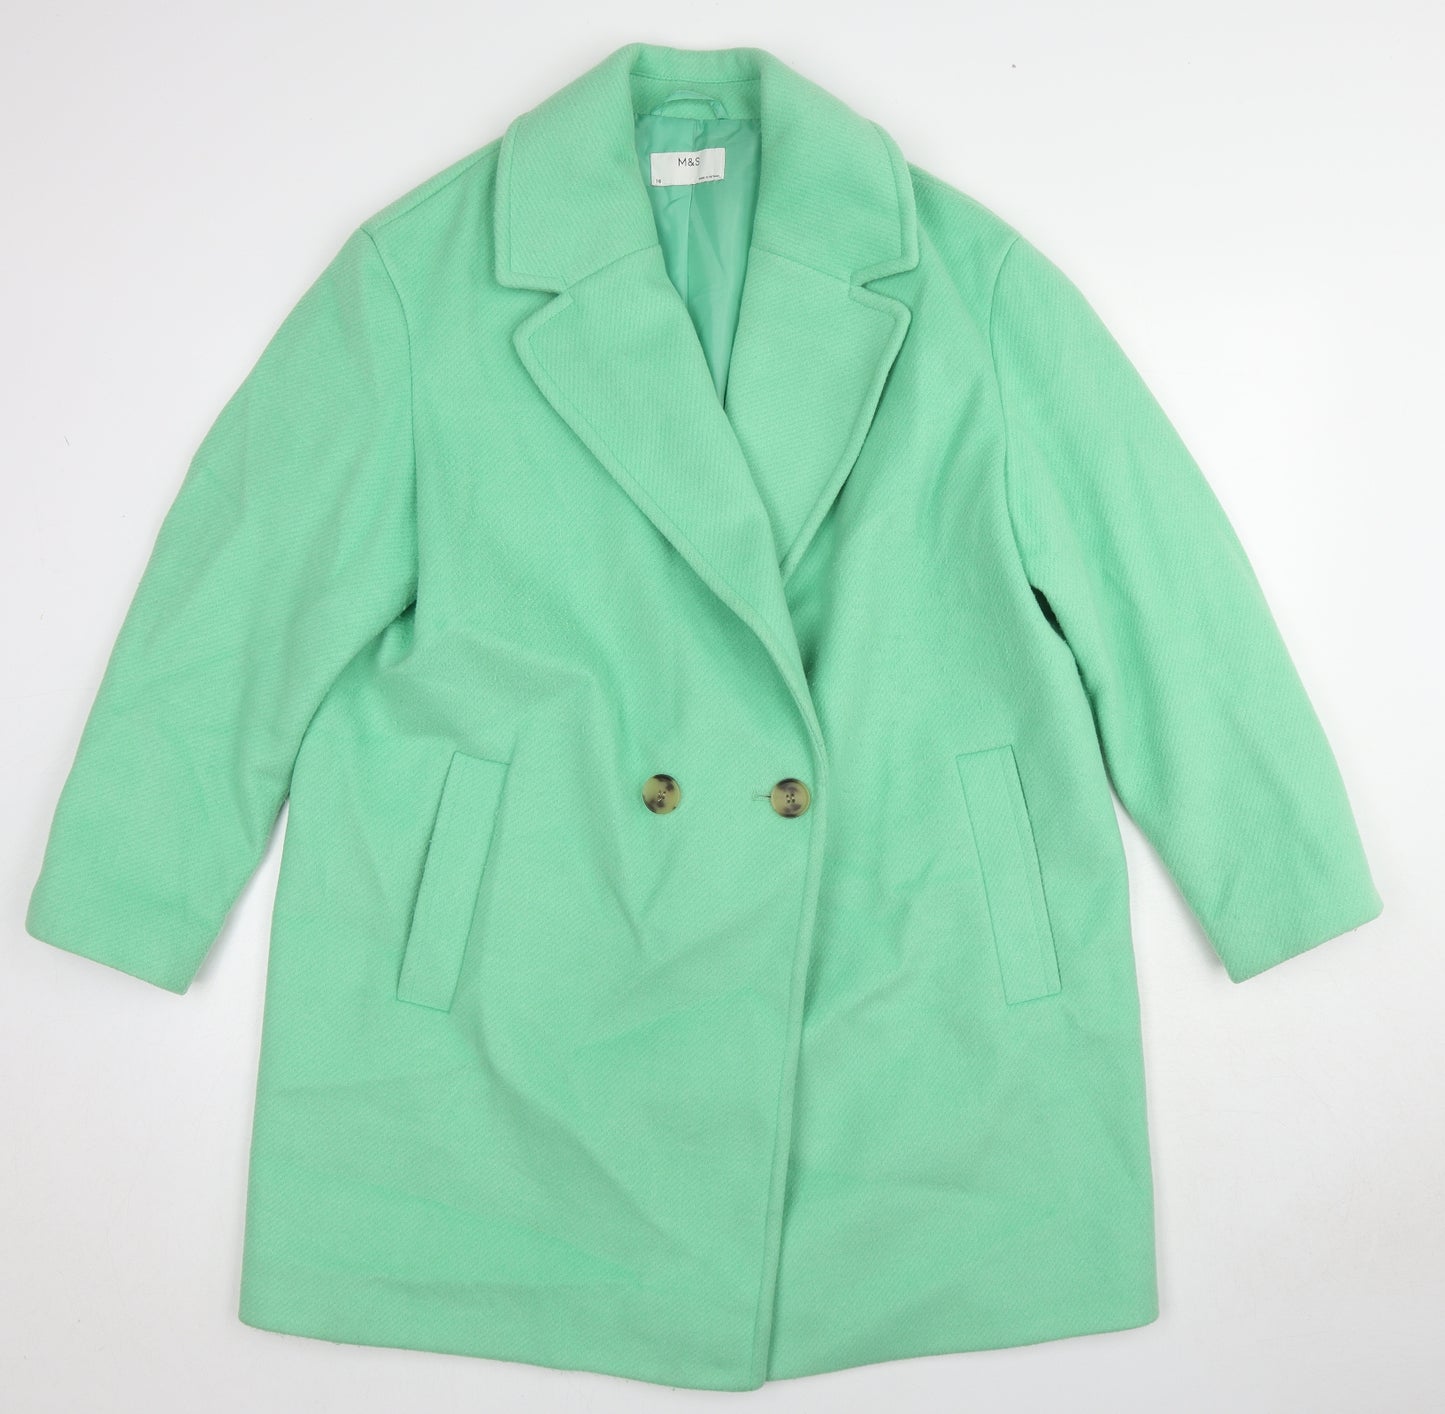 Marks and Spencer Womens Green Pea Coat Coat Size 16 Button